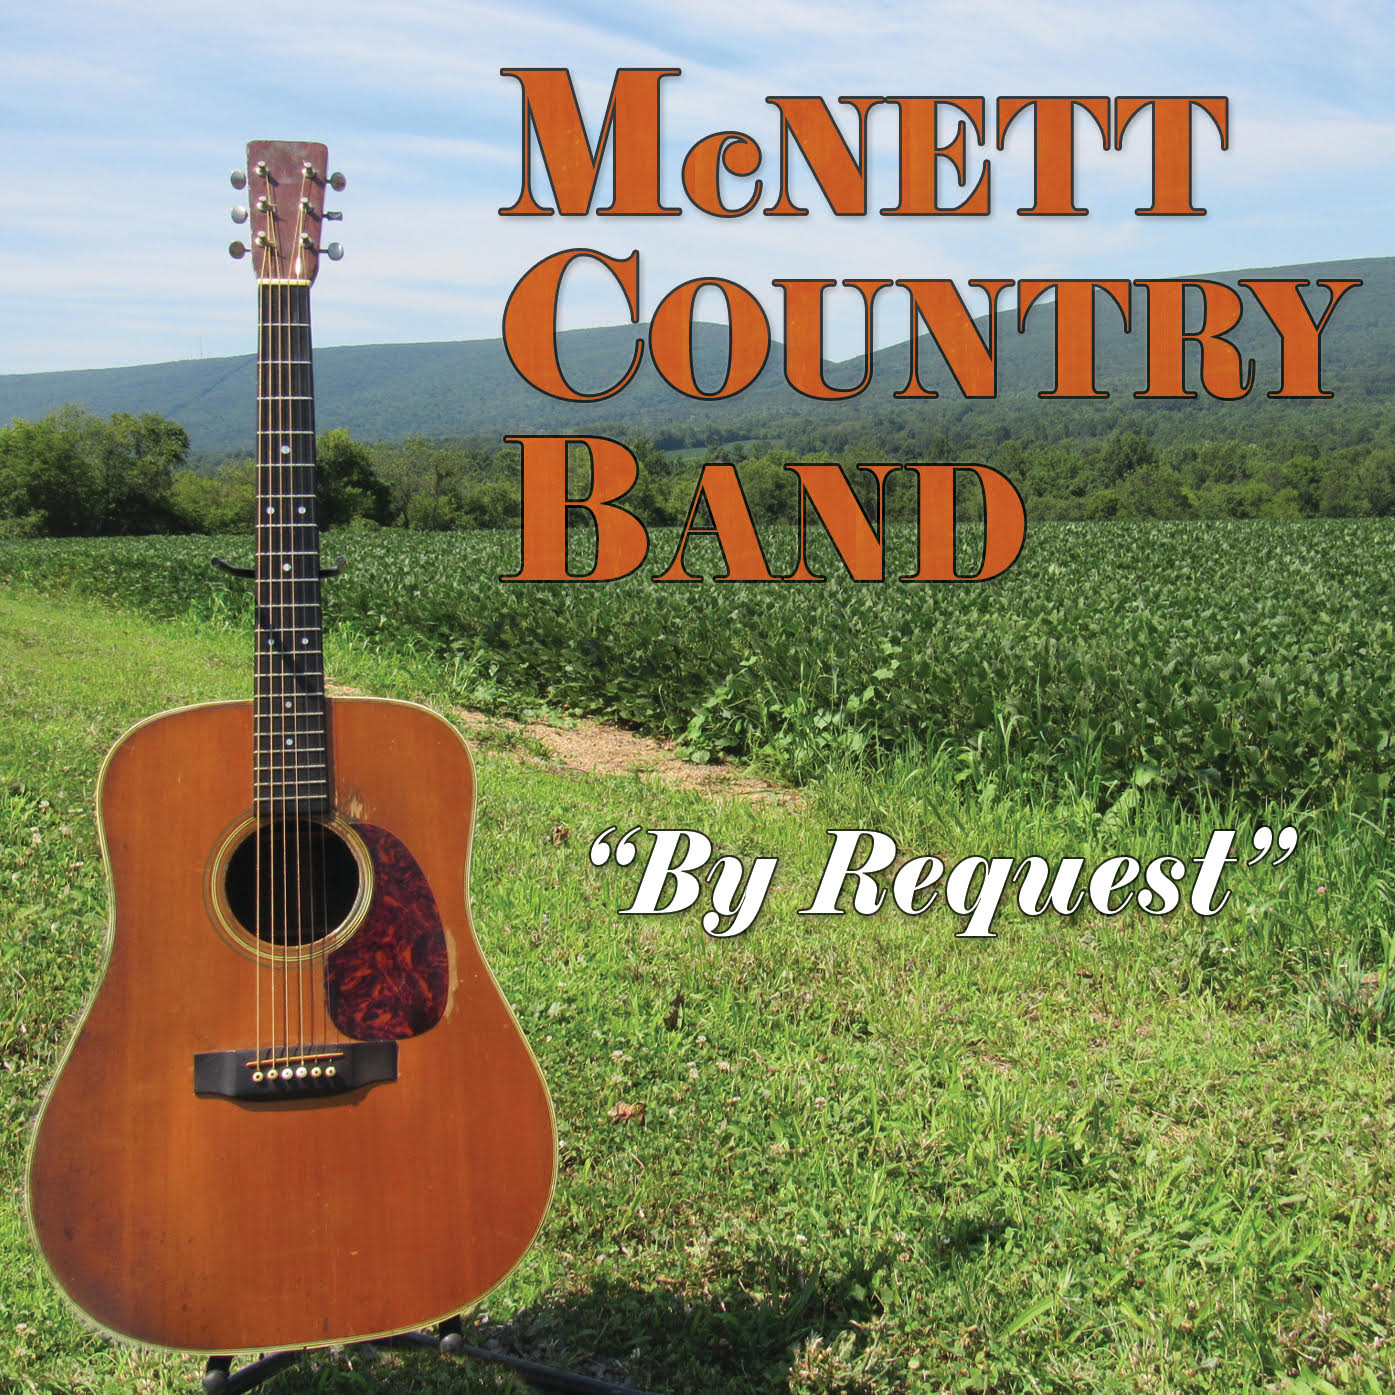 McNett Country Band "By Request"